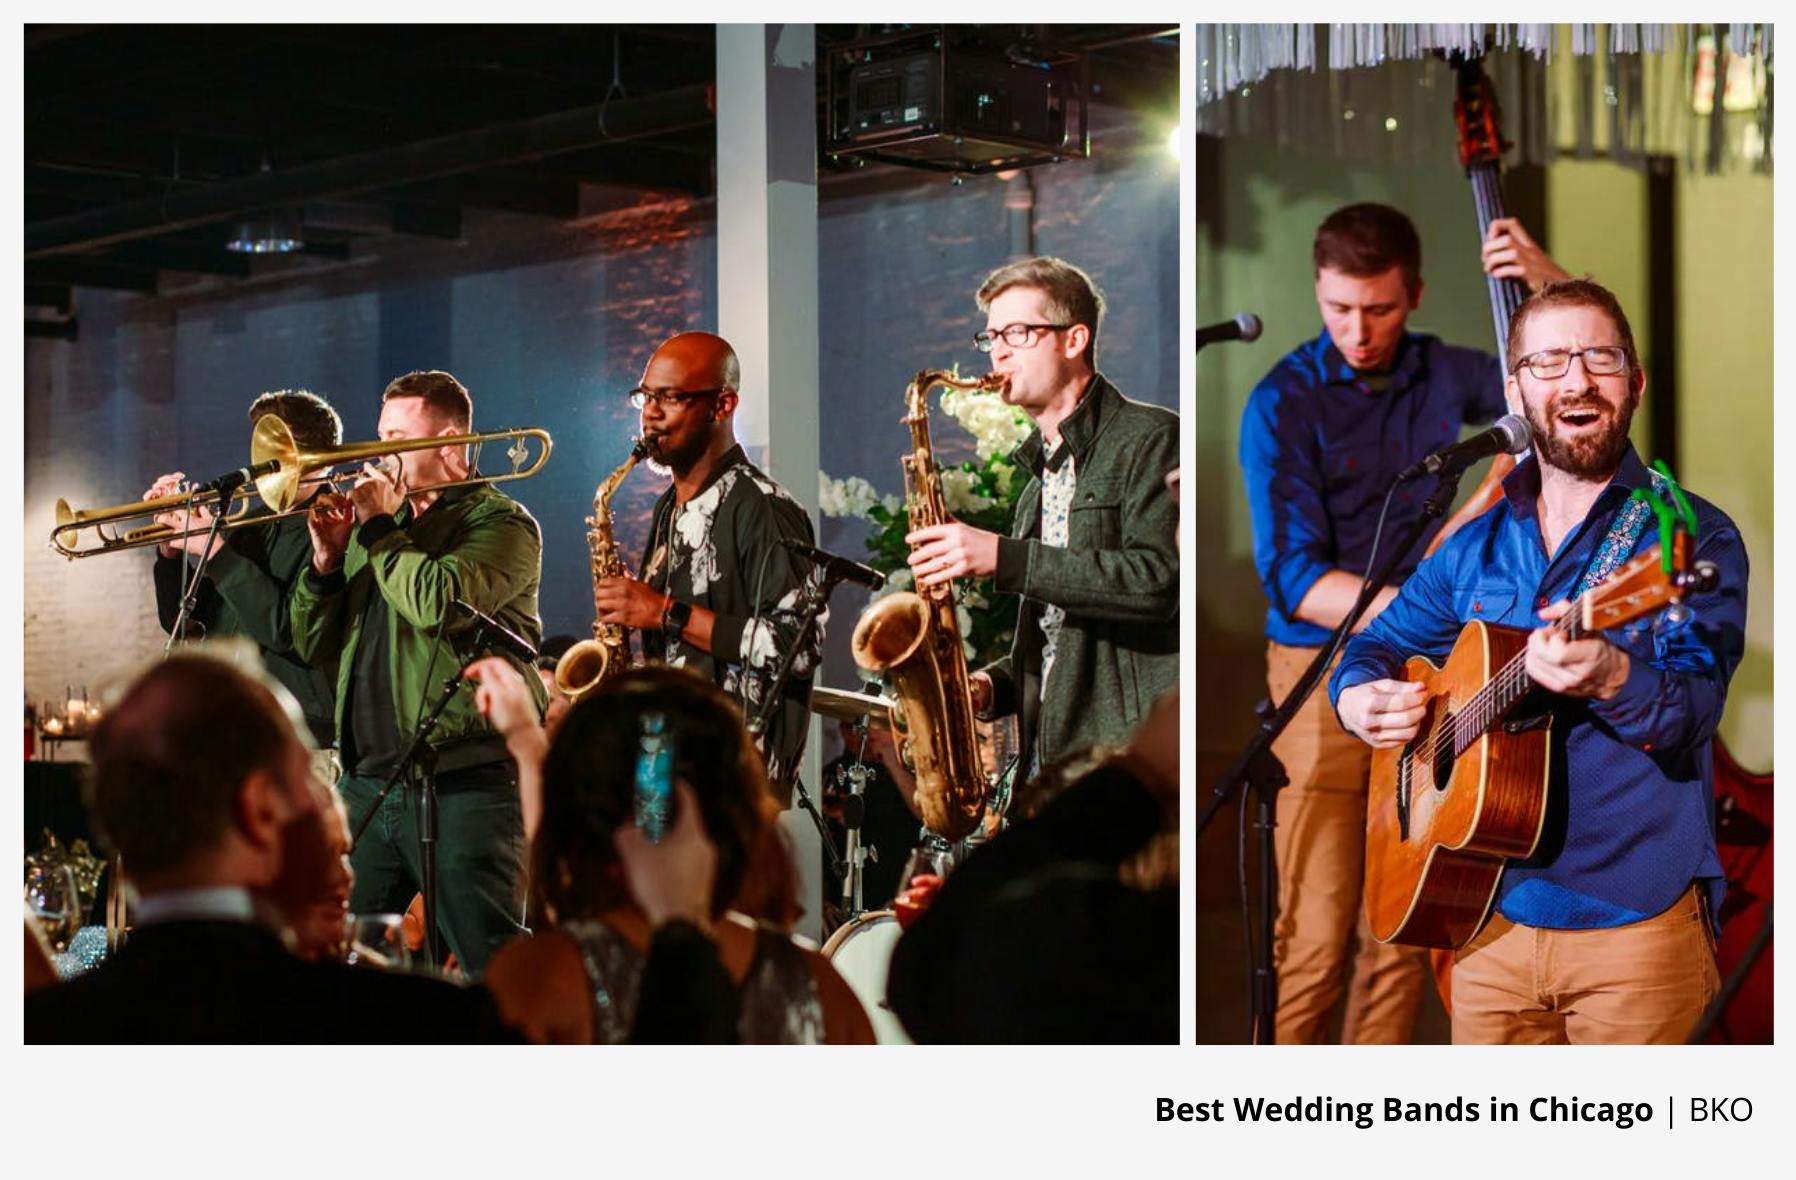 BKO Chicago Wedding Band with Four Men Playing Their Instruments In Front of a Crowd | PartySlate